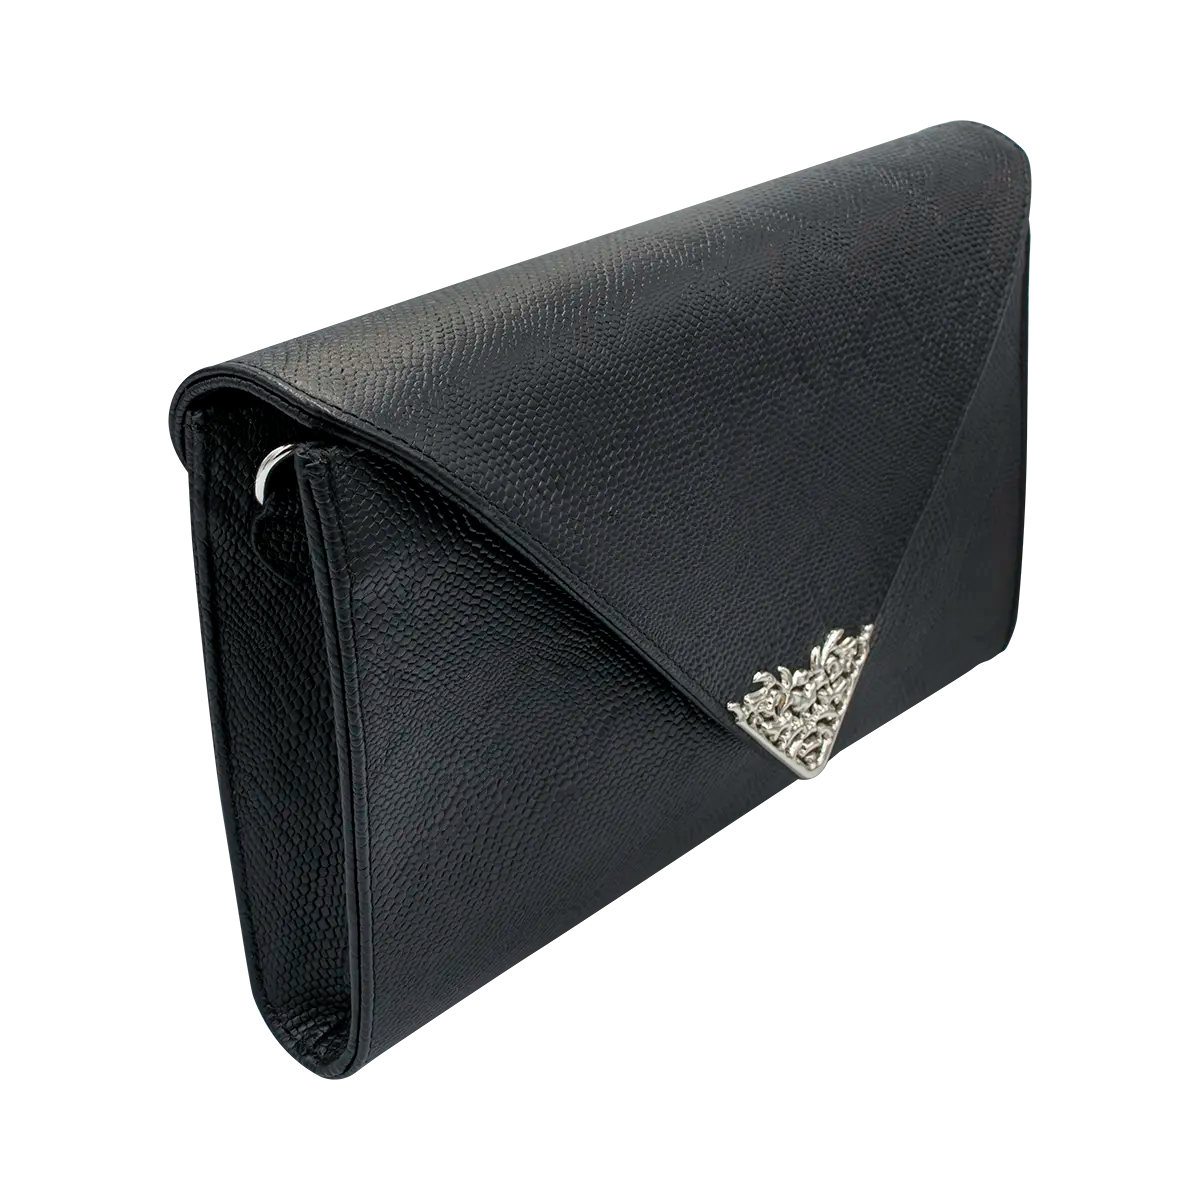 large black print leather clutch with strap. Fashion accessory for women in San Diego, CA.